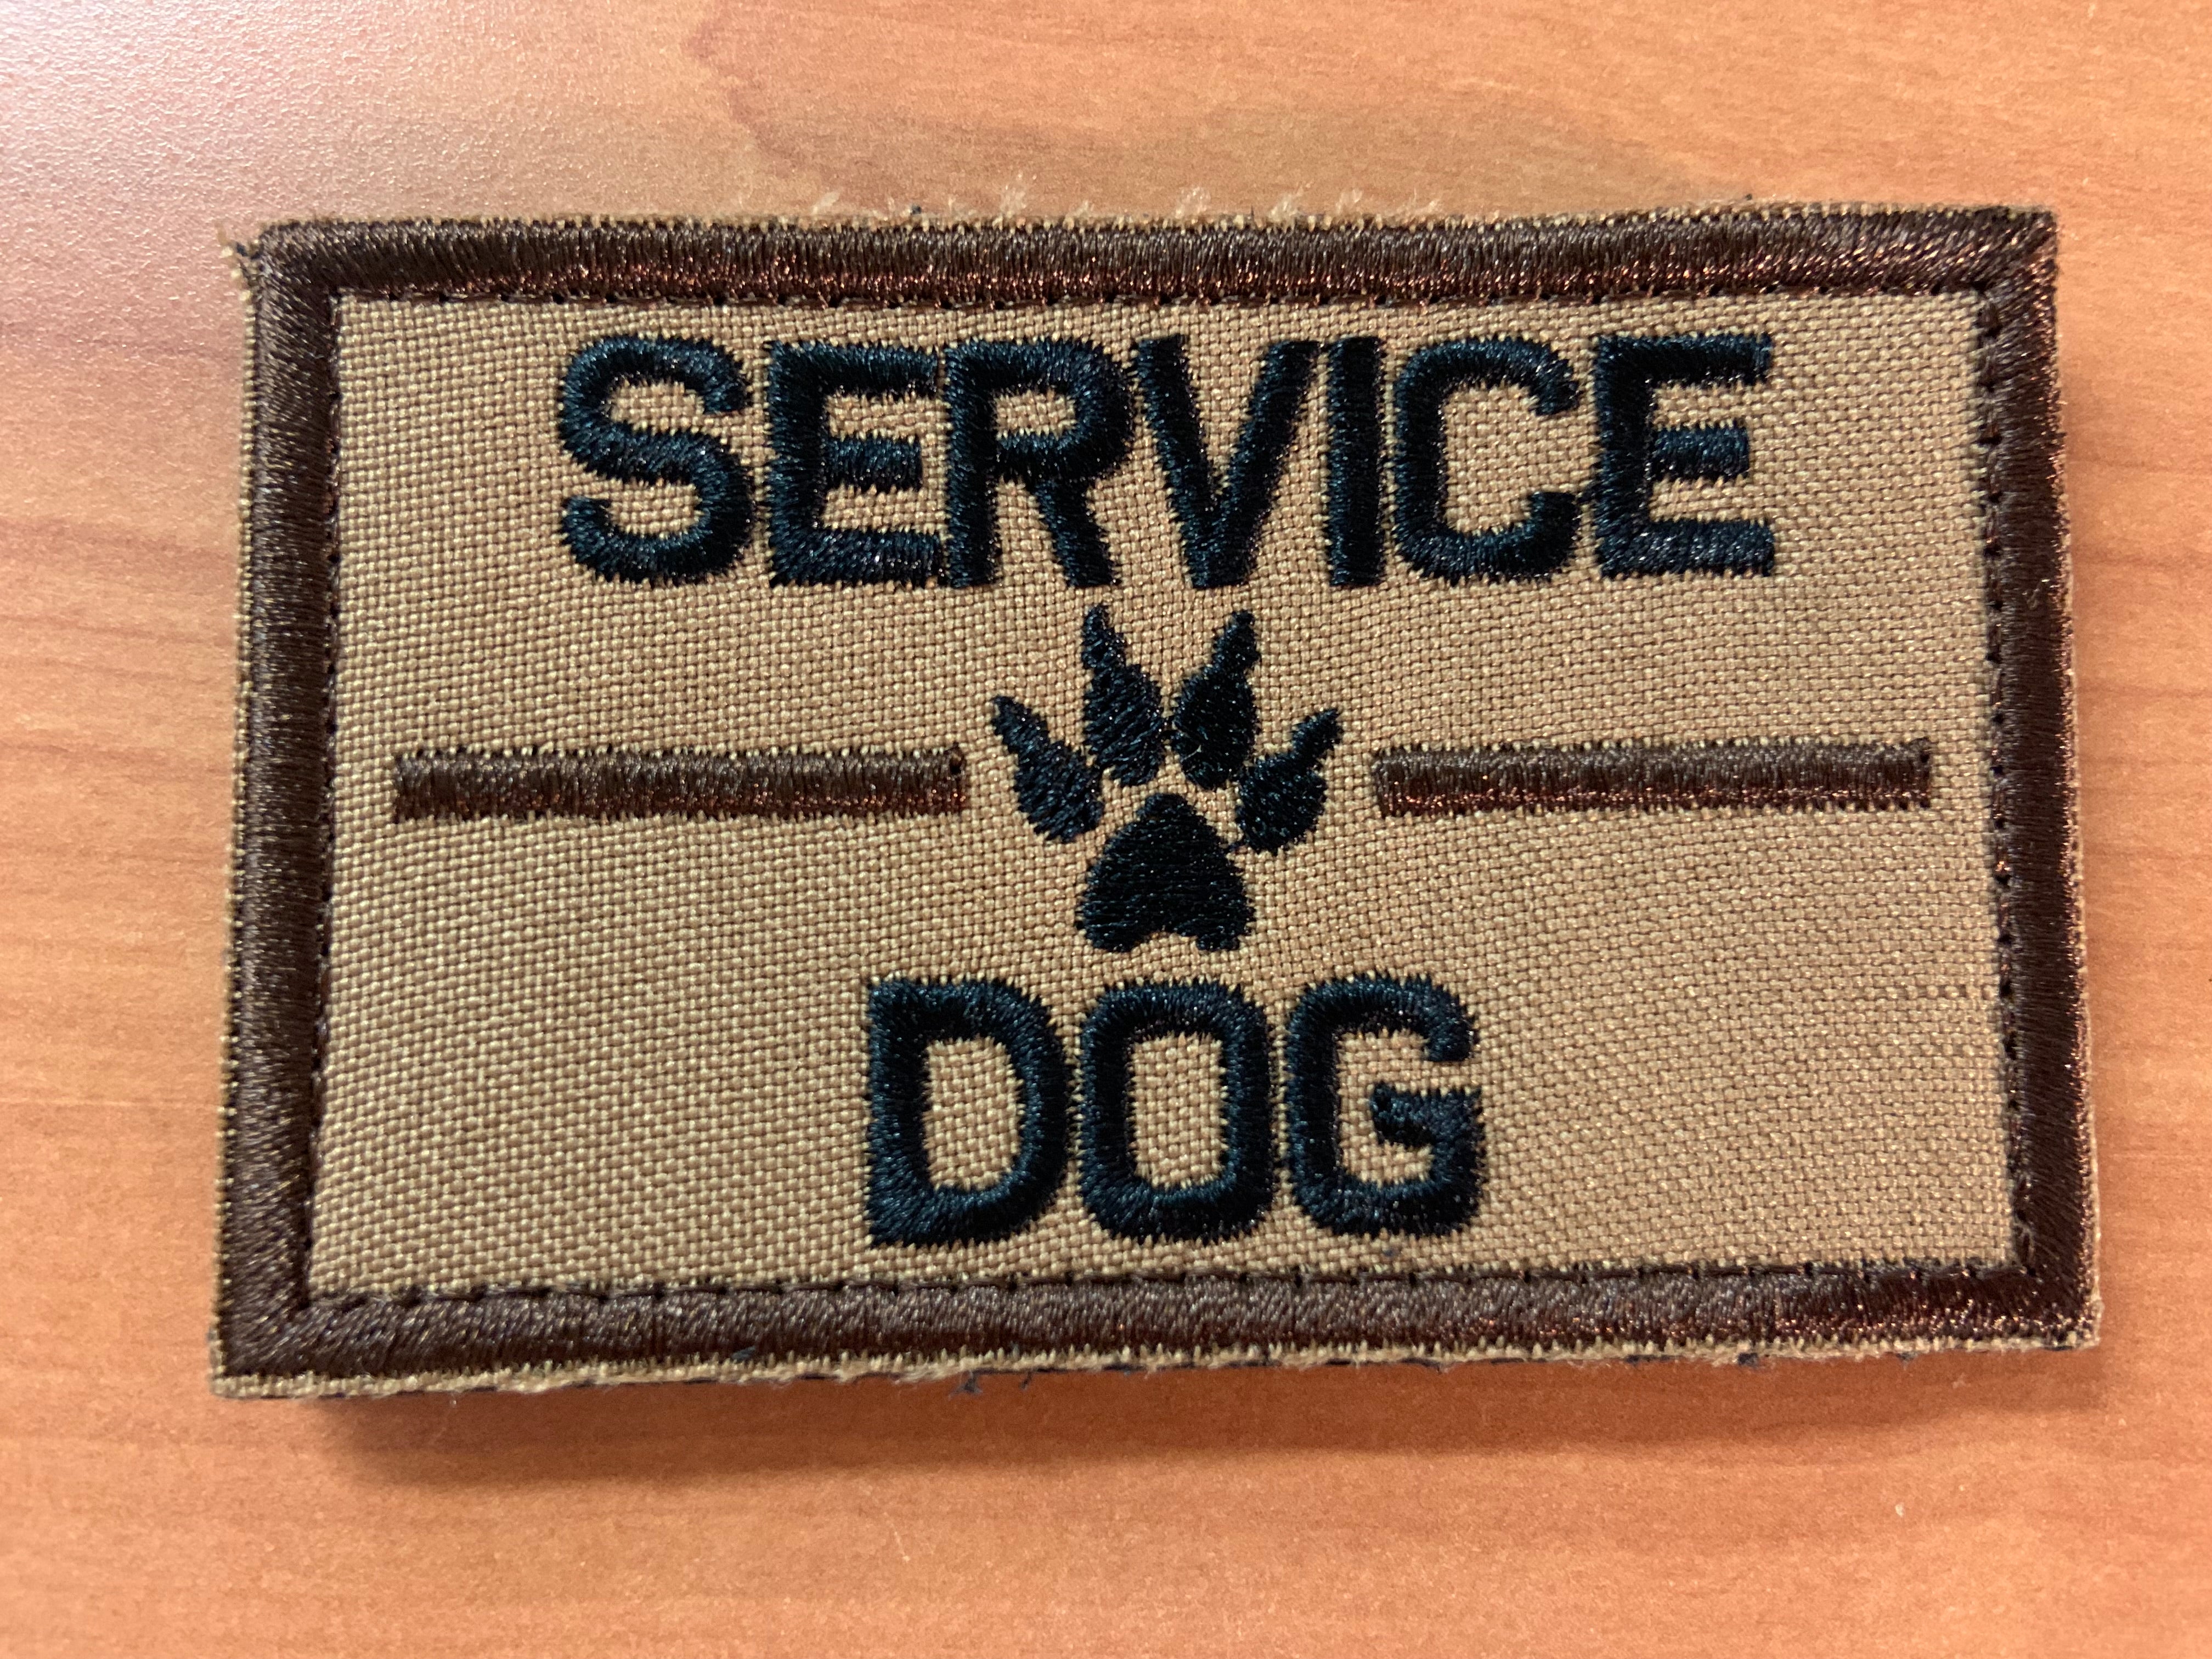 Embroidered Service Dog Patches